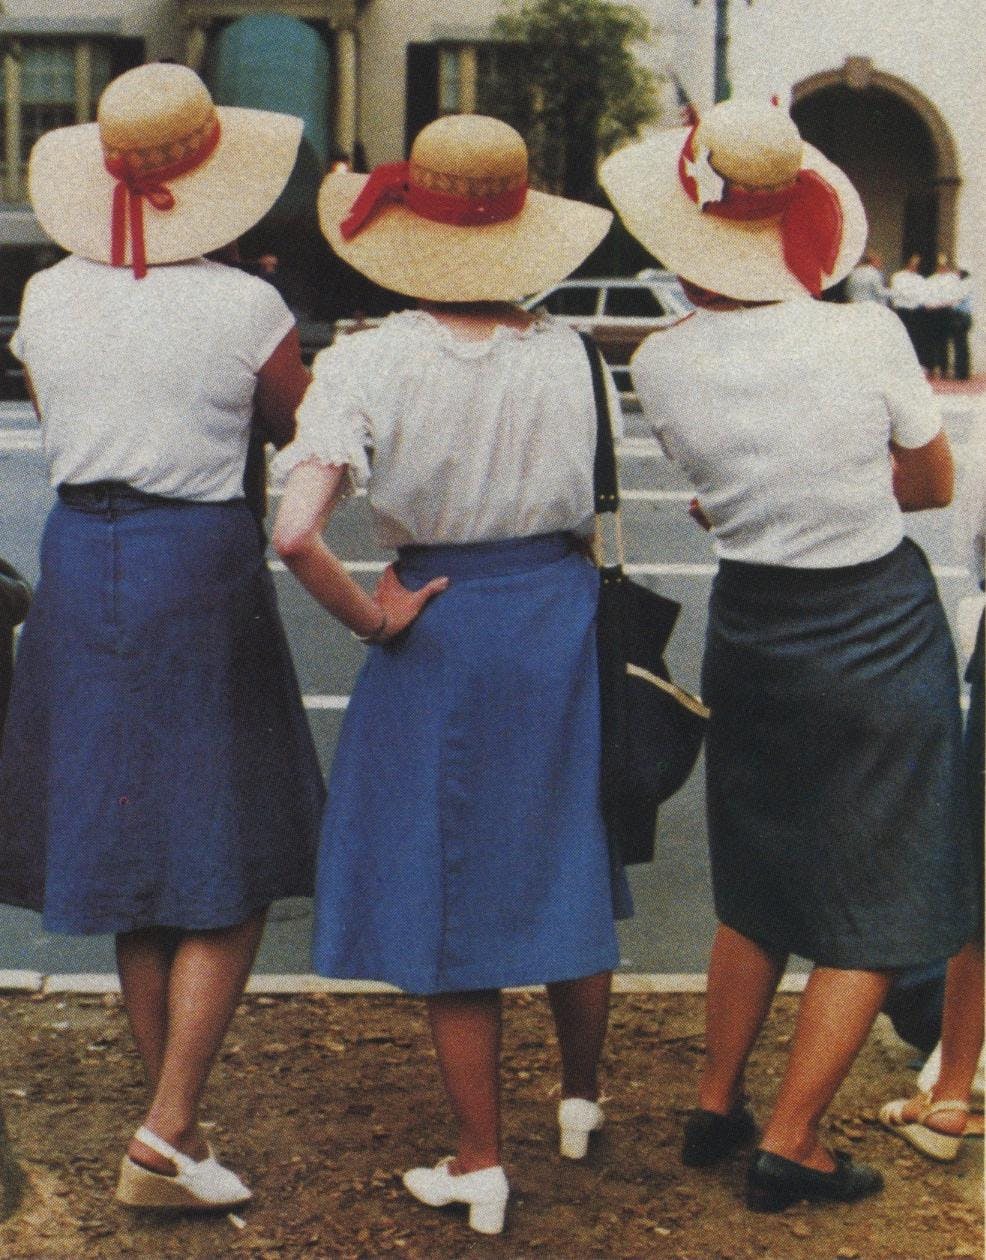 María H. Sandoval, San Antonio "The appeal is in the lines of the foreground subjects, the way each woman has her hips and feet in a different position, and the shapes of the hats. The color quality is excellent, too."